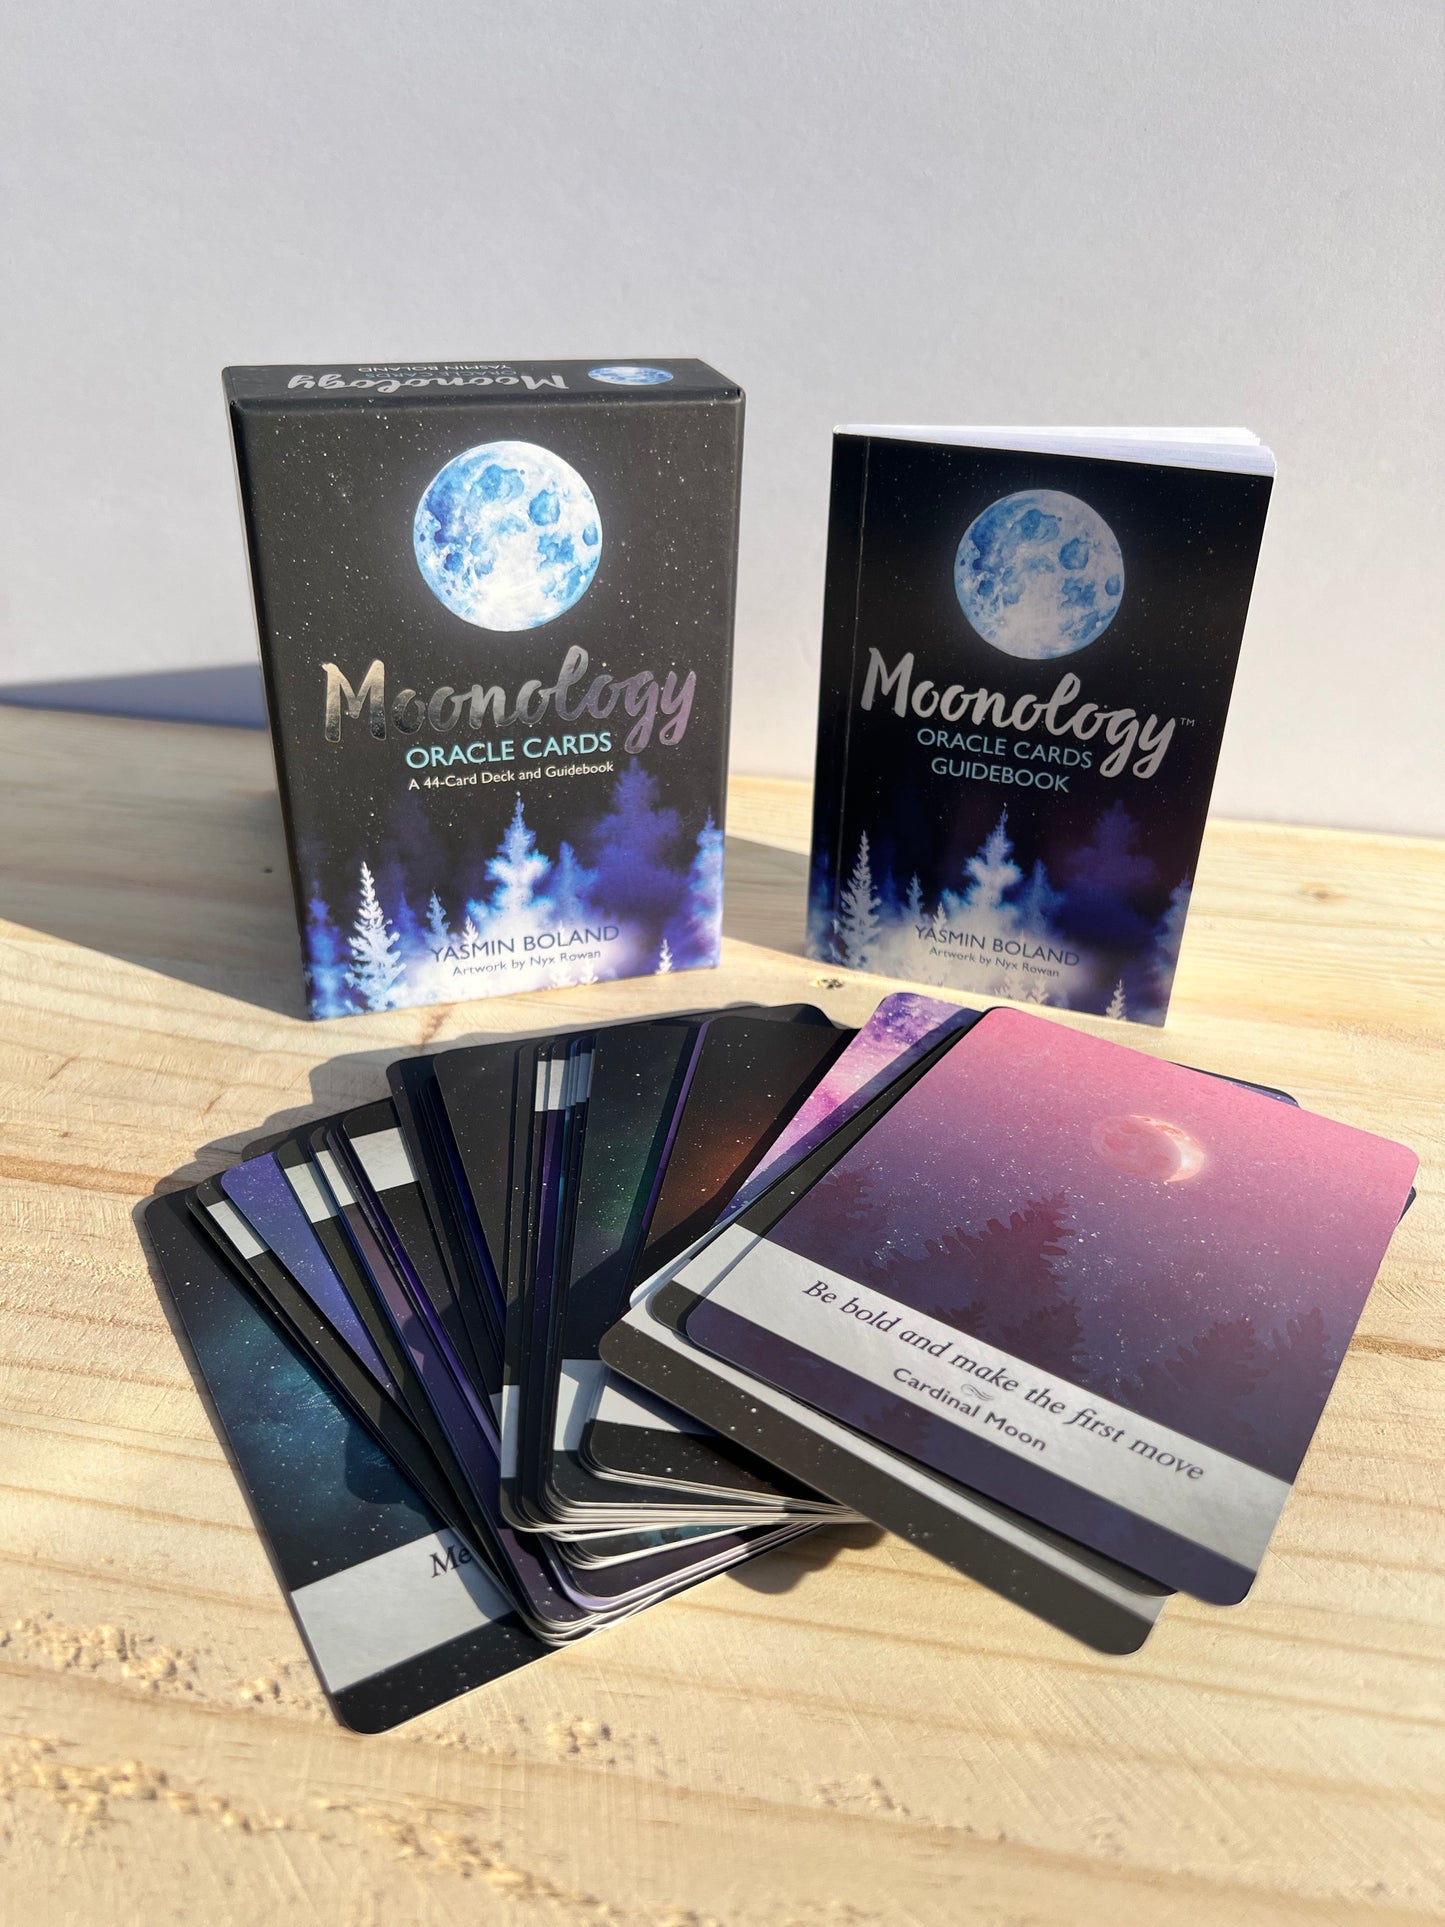 Moonology oracle cards, guidebook, and box.